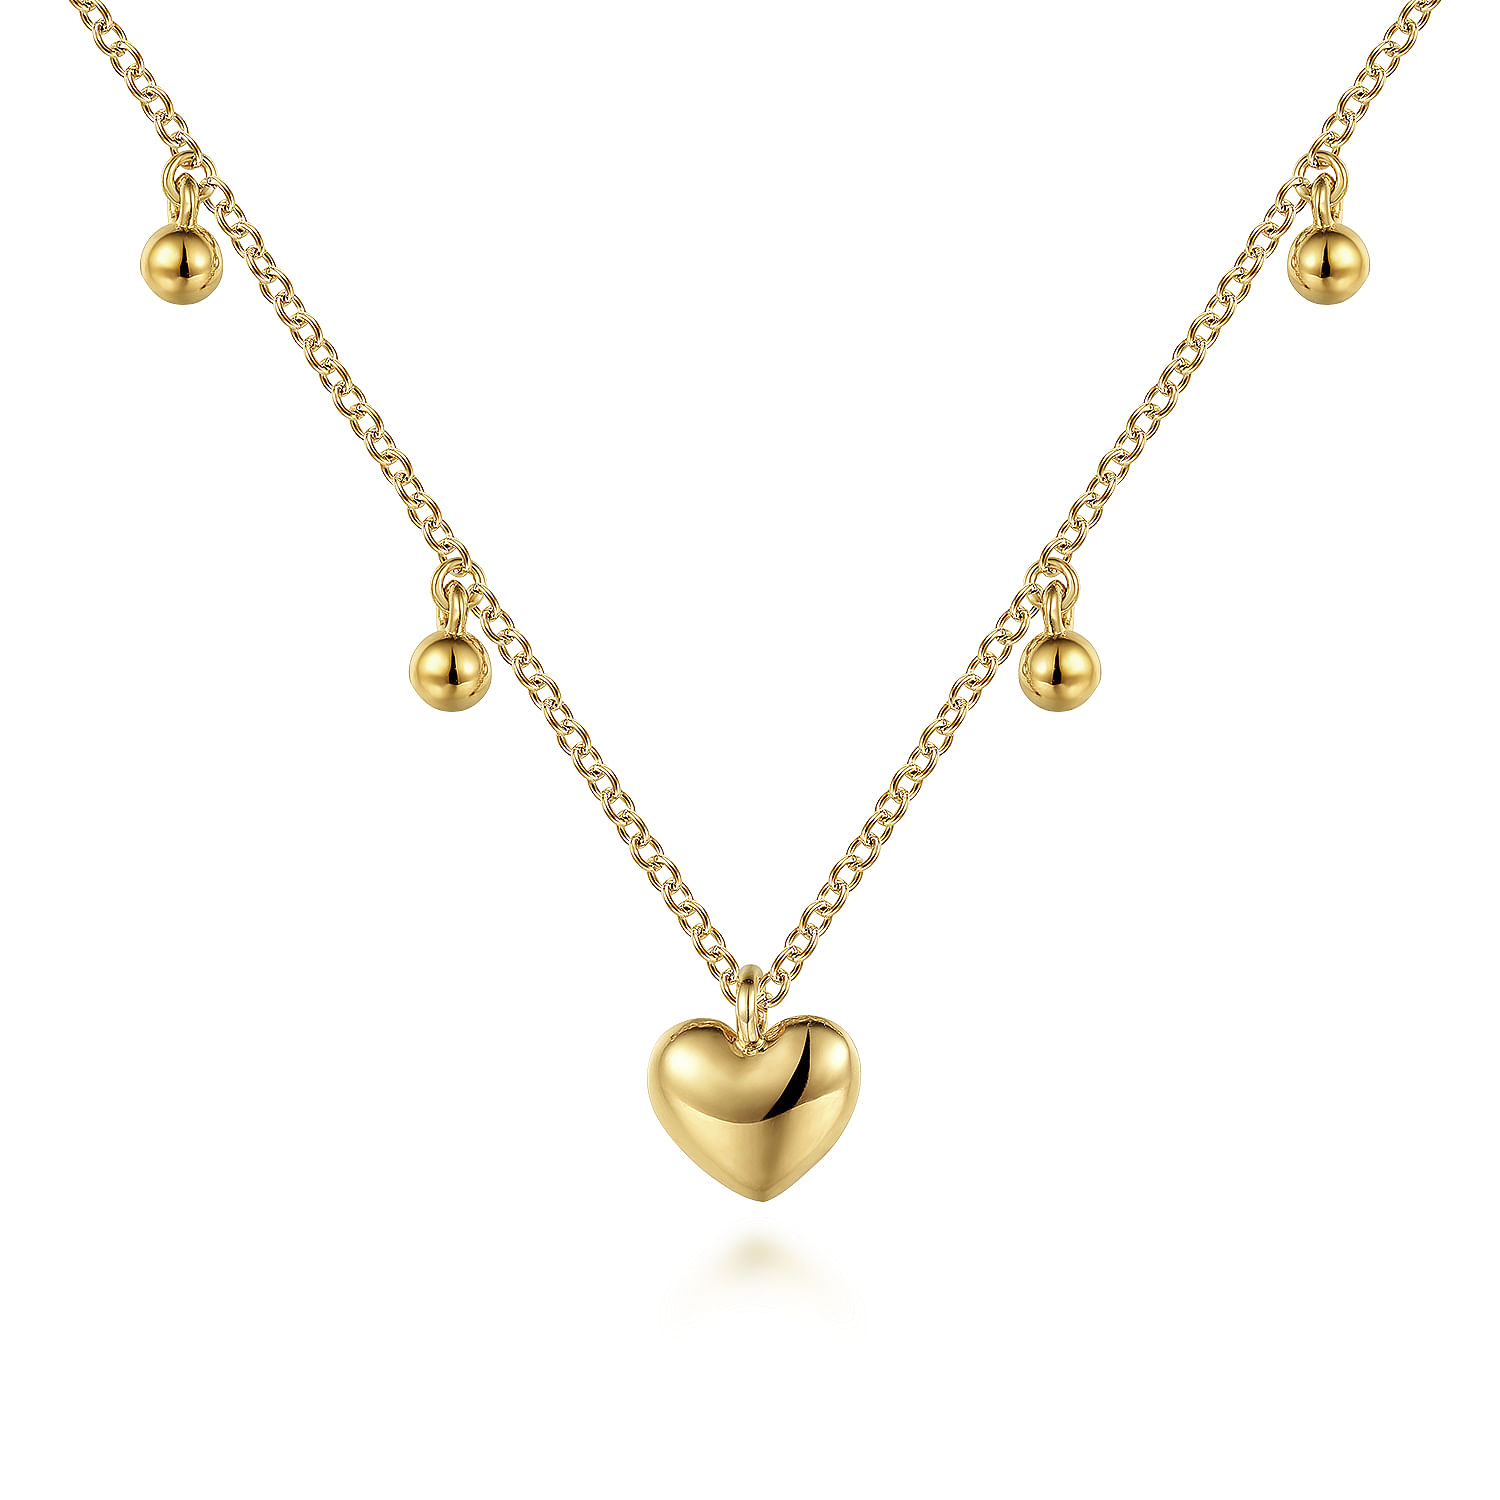 14K Yellow Gold Bujukan Station Necklace with Heart Drop